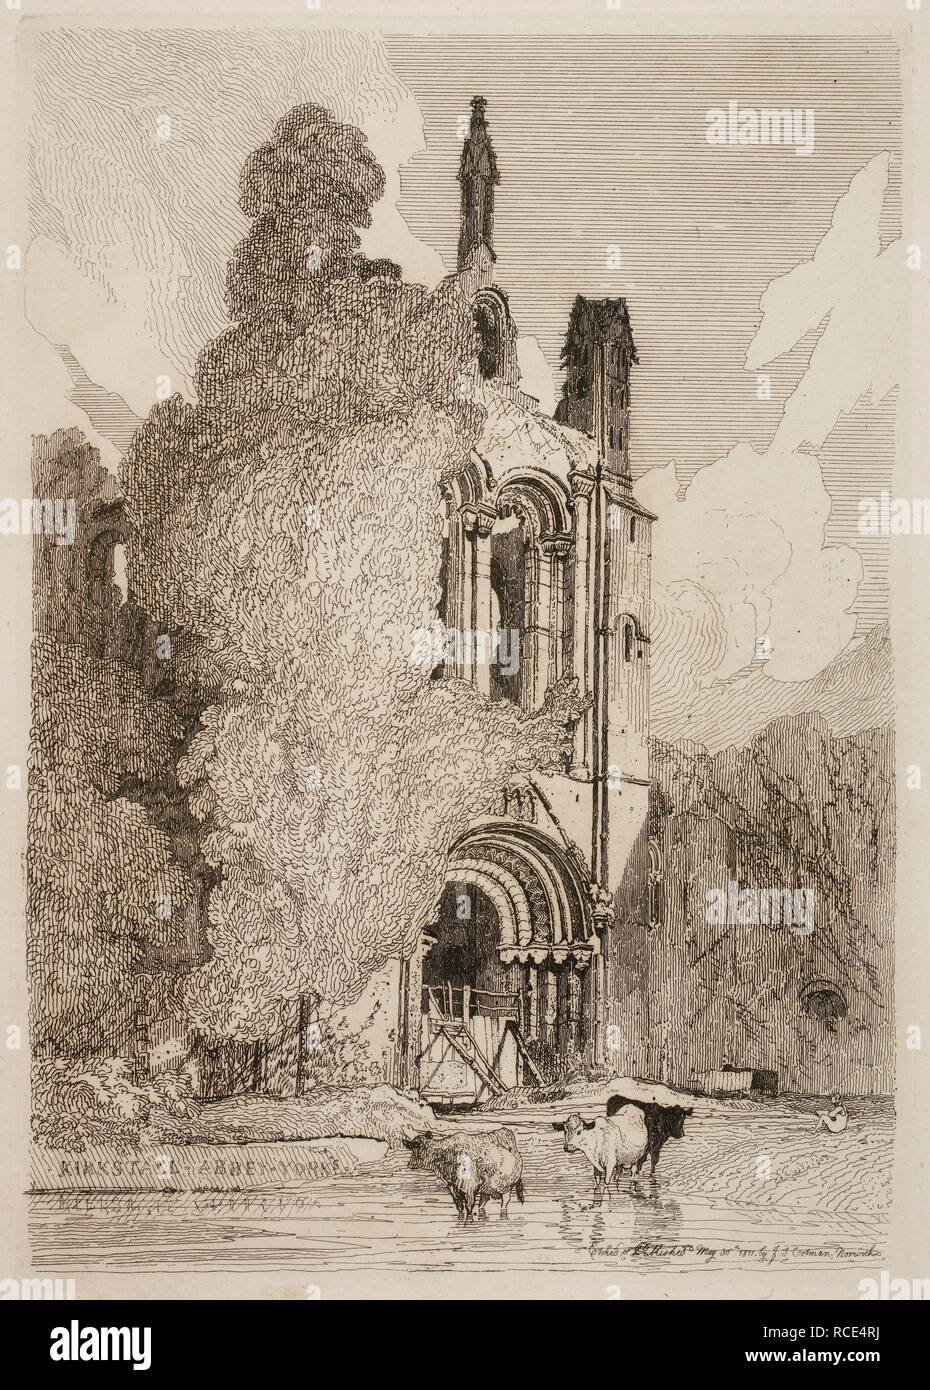 Etching by John Sell Cotman of Kirkstall Abbey church ruins. Cows in the river. . Etchings by John Sell Cotman. London England. Source: 199.i.6 Plate 17. Stock Photo